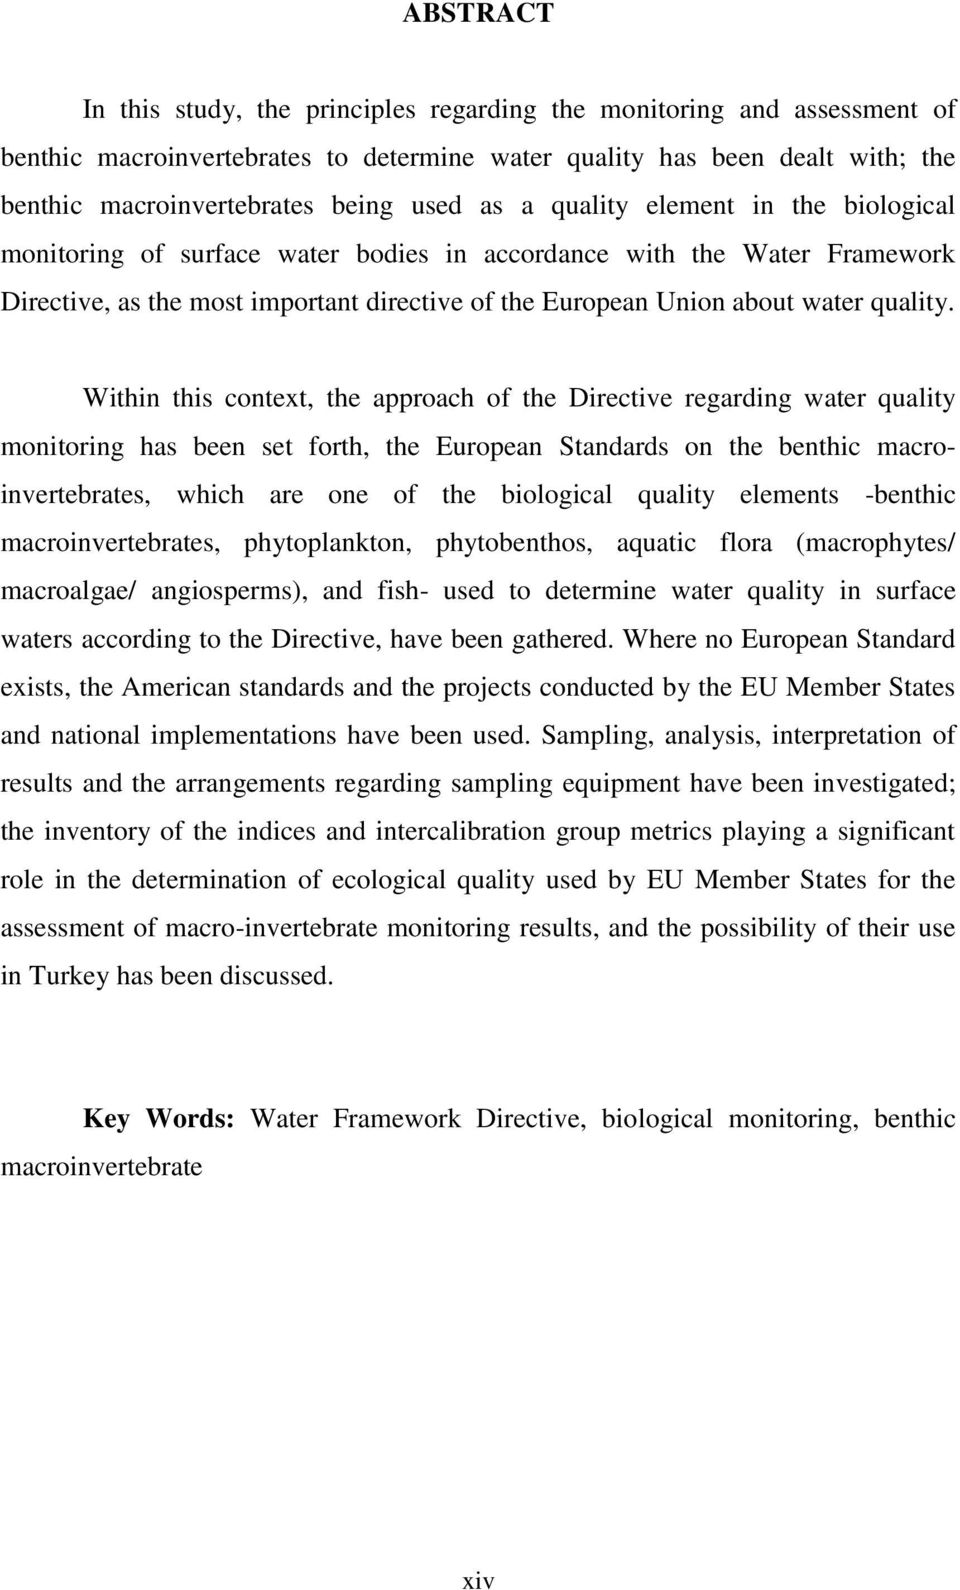 Within this context, the approach of the Directive regarding water quality monitoring has been set forth, the European Standards on the benthic macroinvertebrates, which are one of the biological